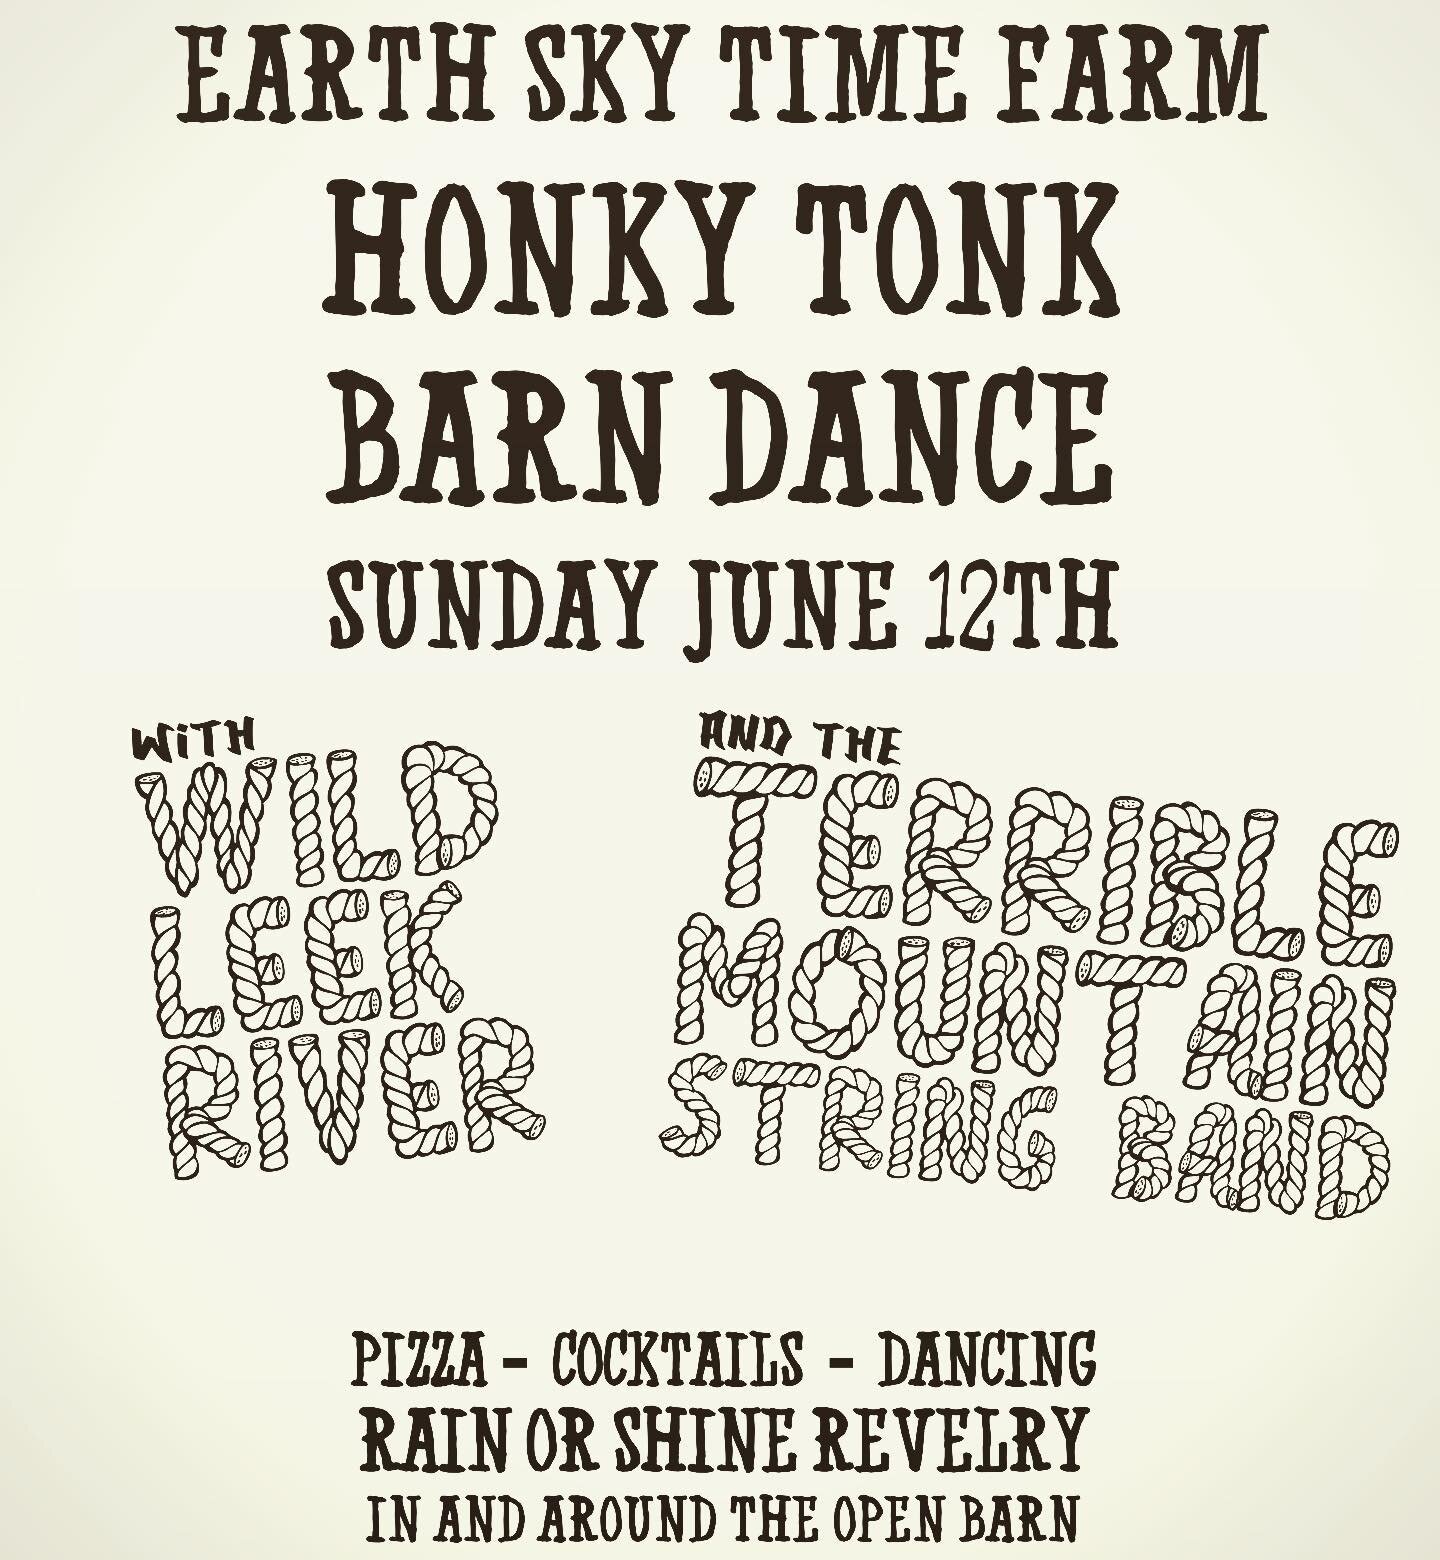 We were really looking forward to welcoming @spiritfamilyreunion back to the farm this Sunday, but that danged covid found em this week and sadly, they had to cancel their gigs. Fortunately our dear friends in @terriblemountainstringband stepped in a